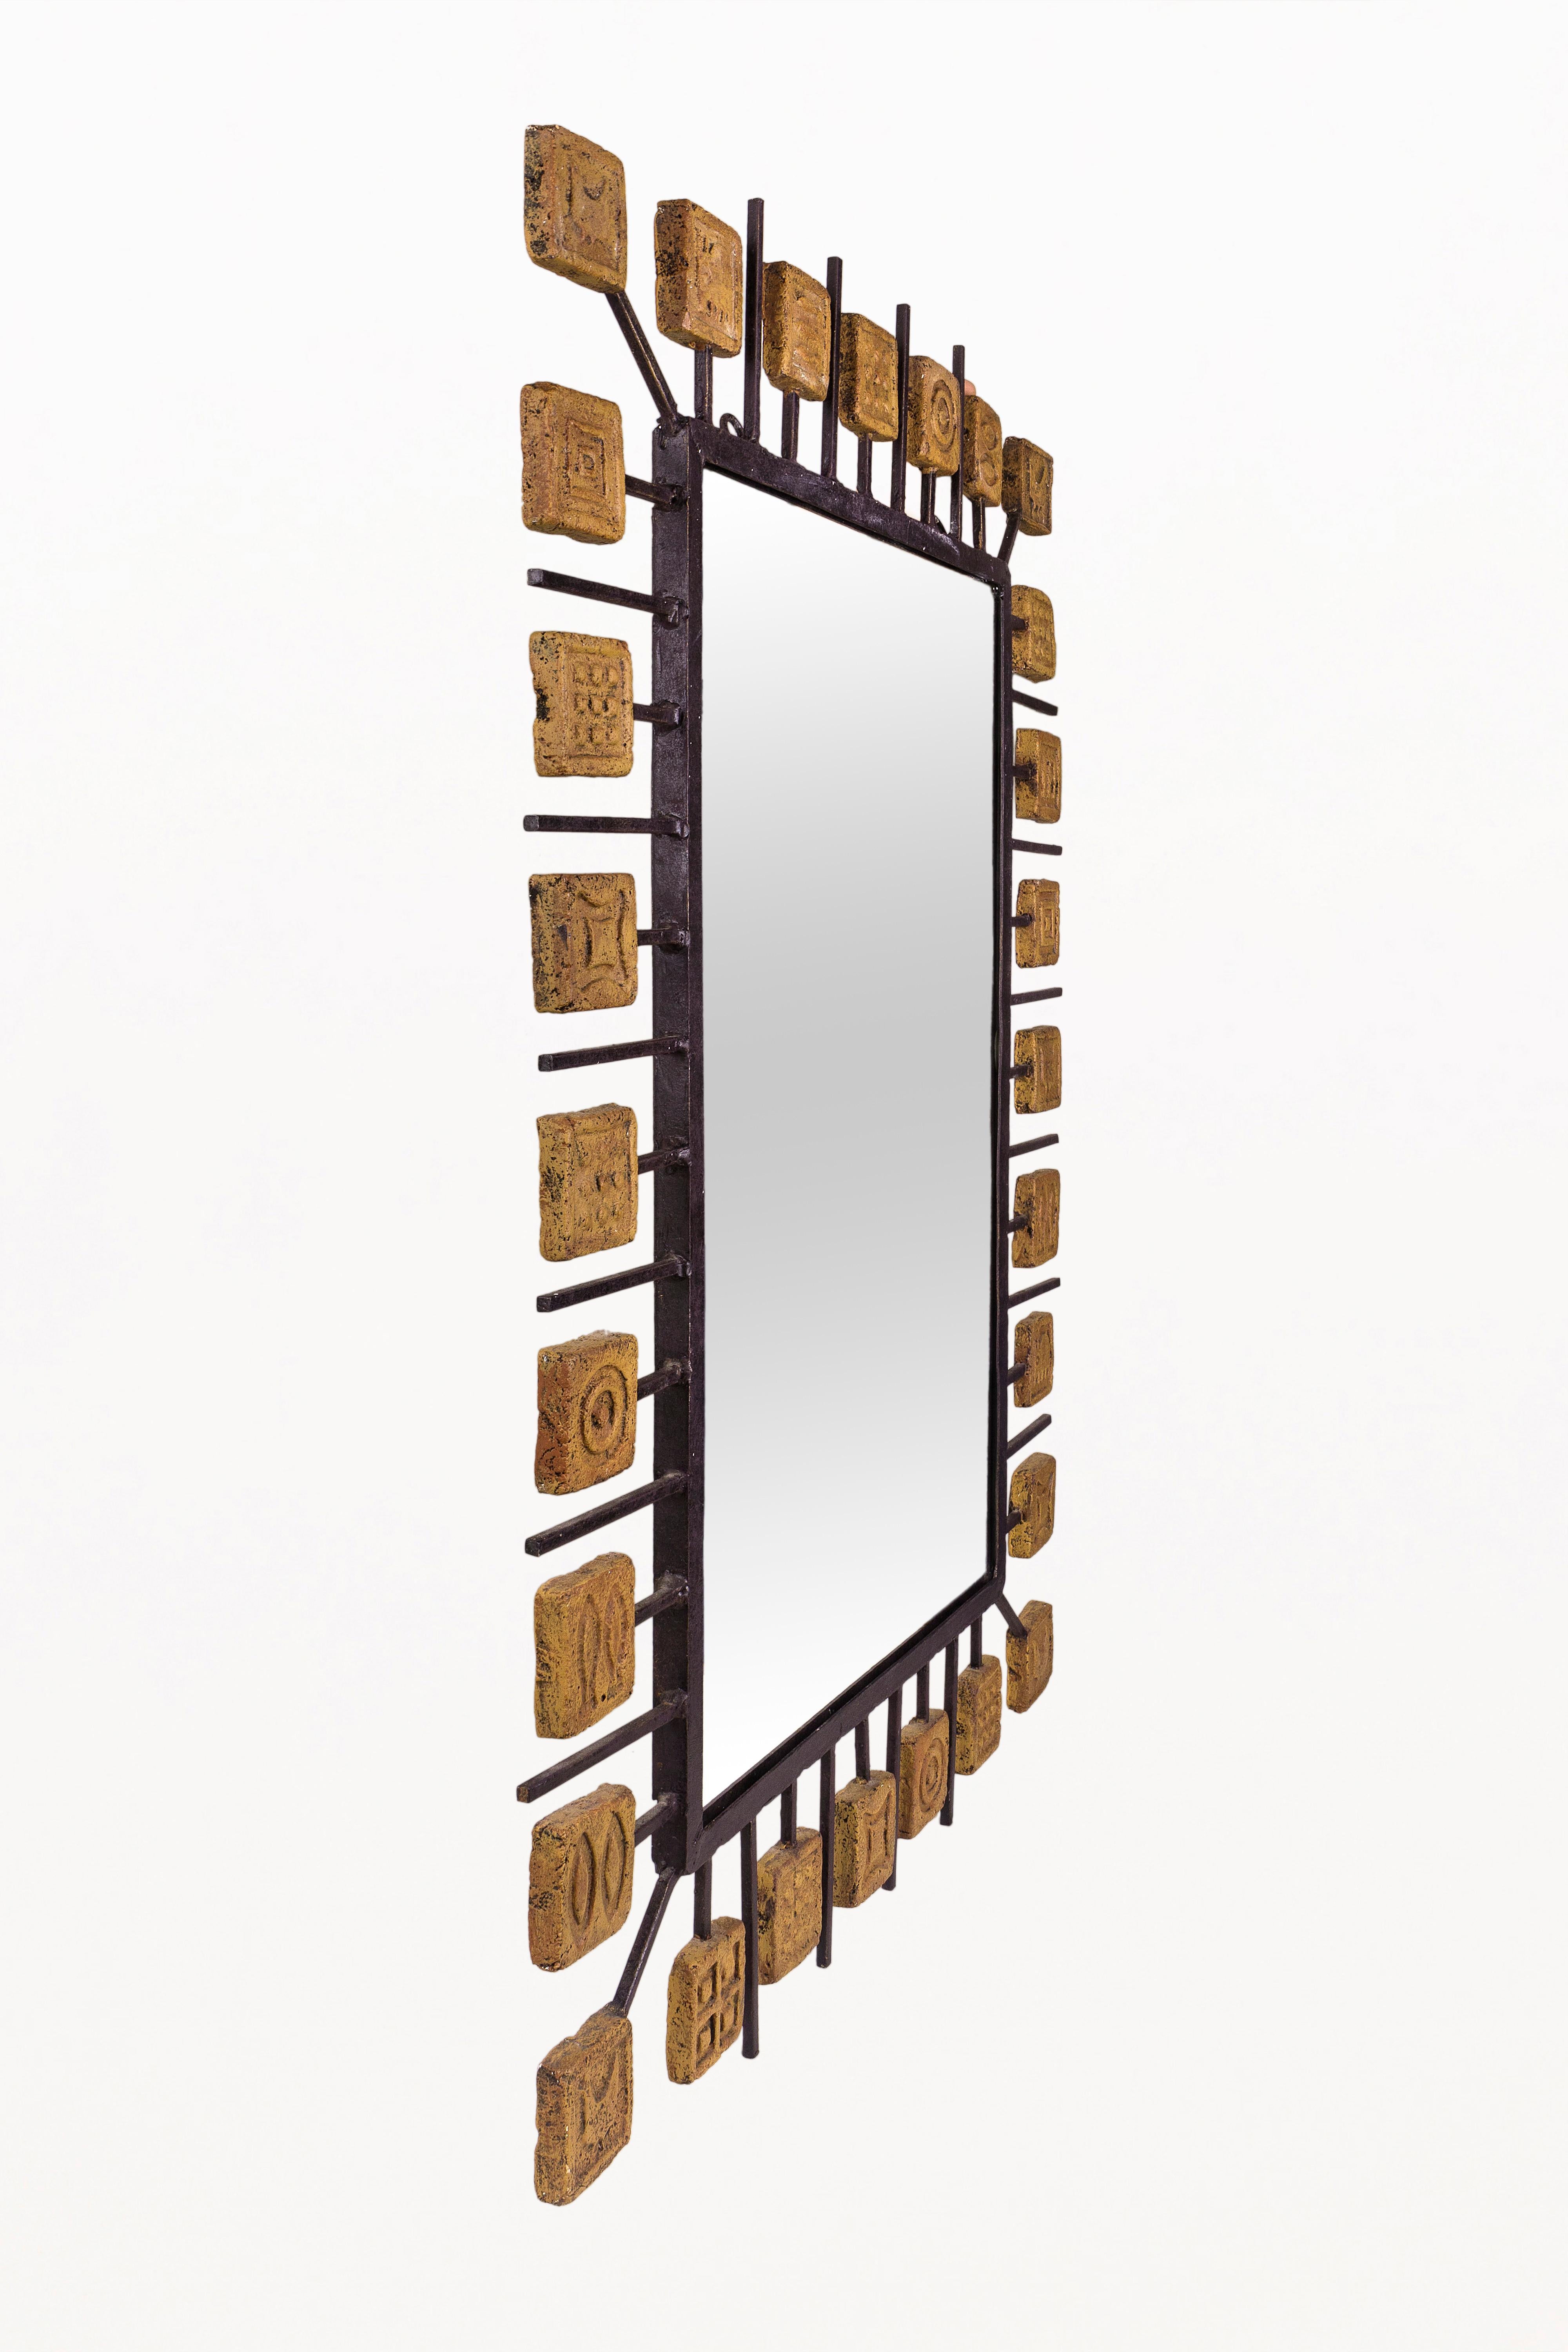 Mirror attributed to Clizia.
Lacquered metal and terracotta,
Italy, circa 1970
Very good vintage condition.
 